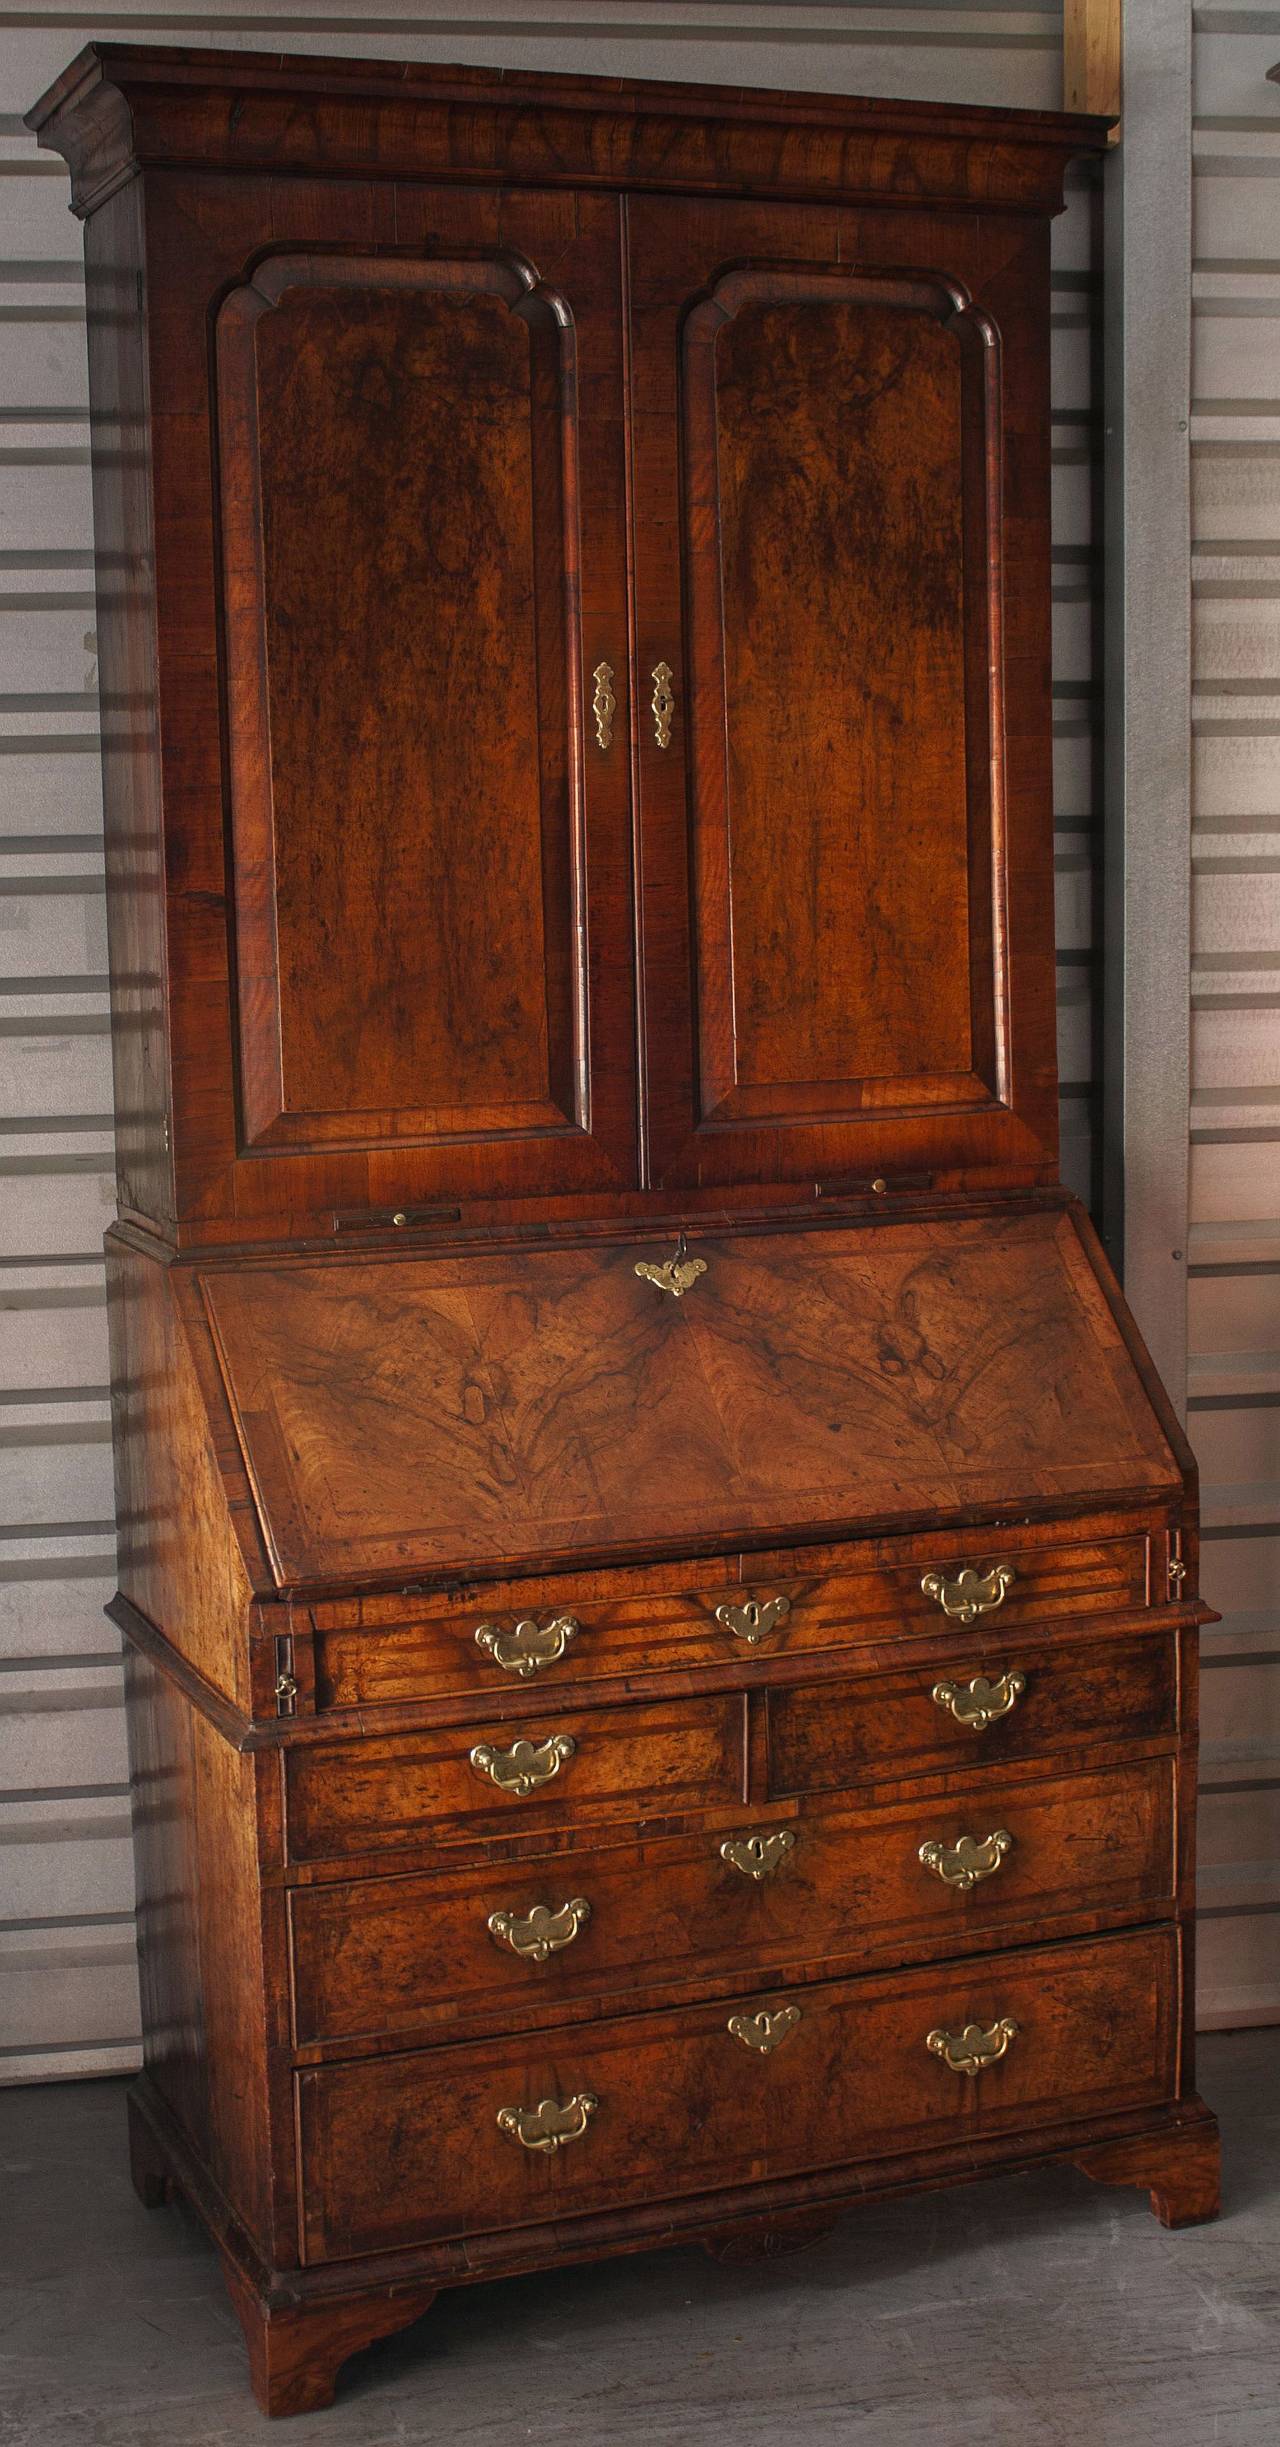 A fine English bureau bookcase secretary of burr walnut from the Georgian era, circa 1780, featuring an upper tier with canopy top over two paneled doors, enclosing three bookshelves.
The fall front enclosing a central cupboard flanked by secret